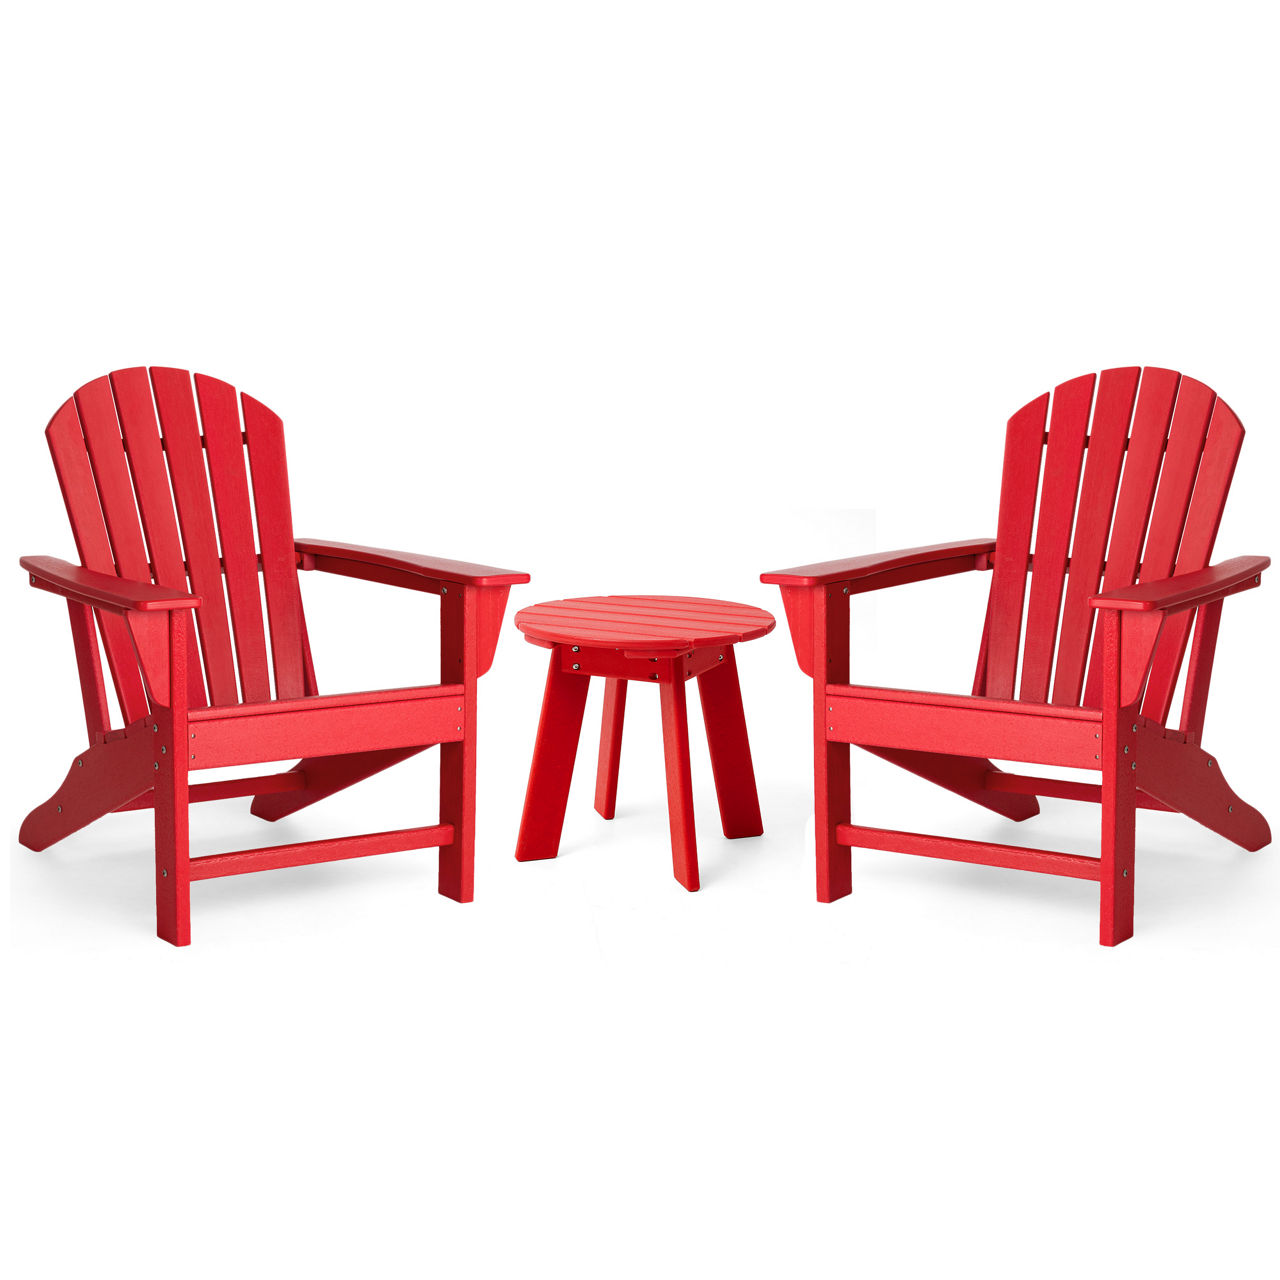 Red 3-Piece Adirondack HDPE Outdoor Chair & Side Table Set